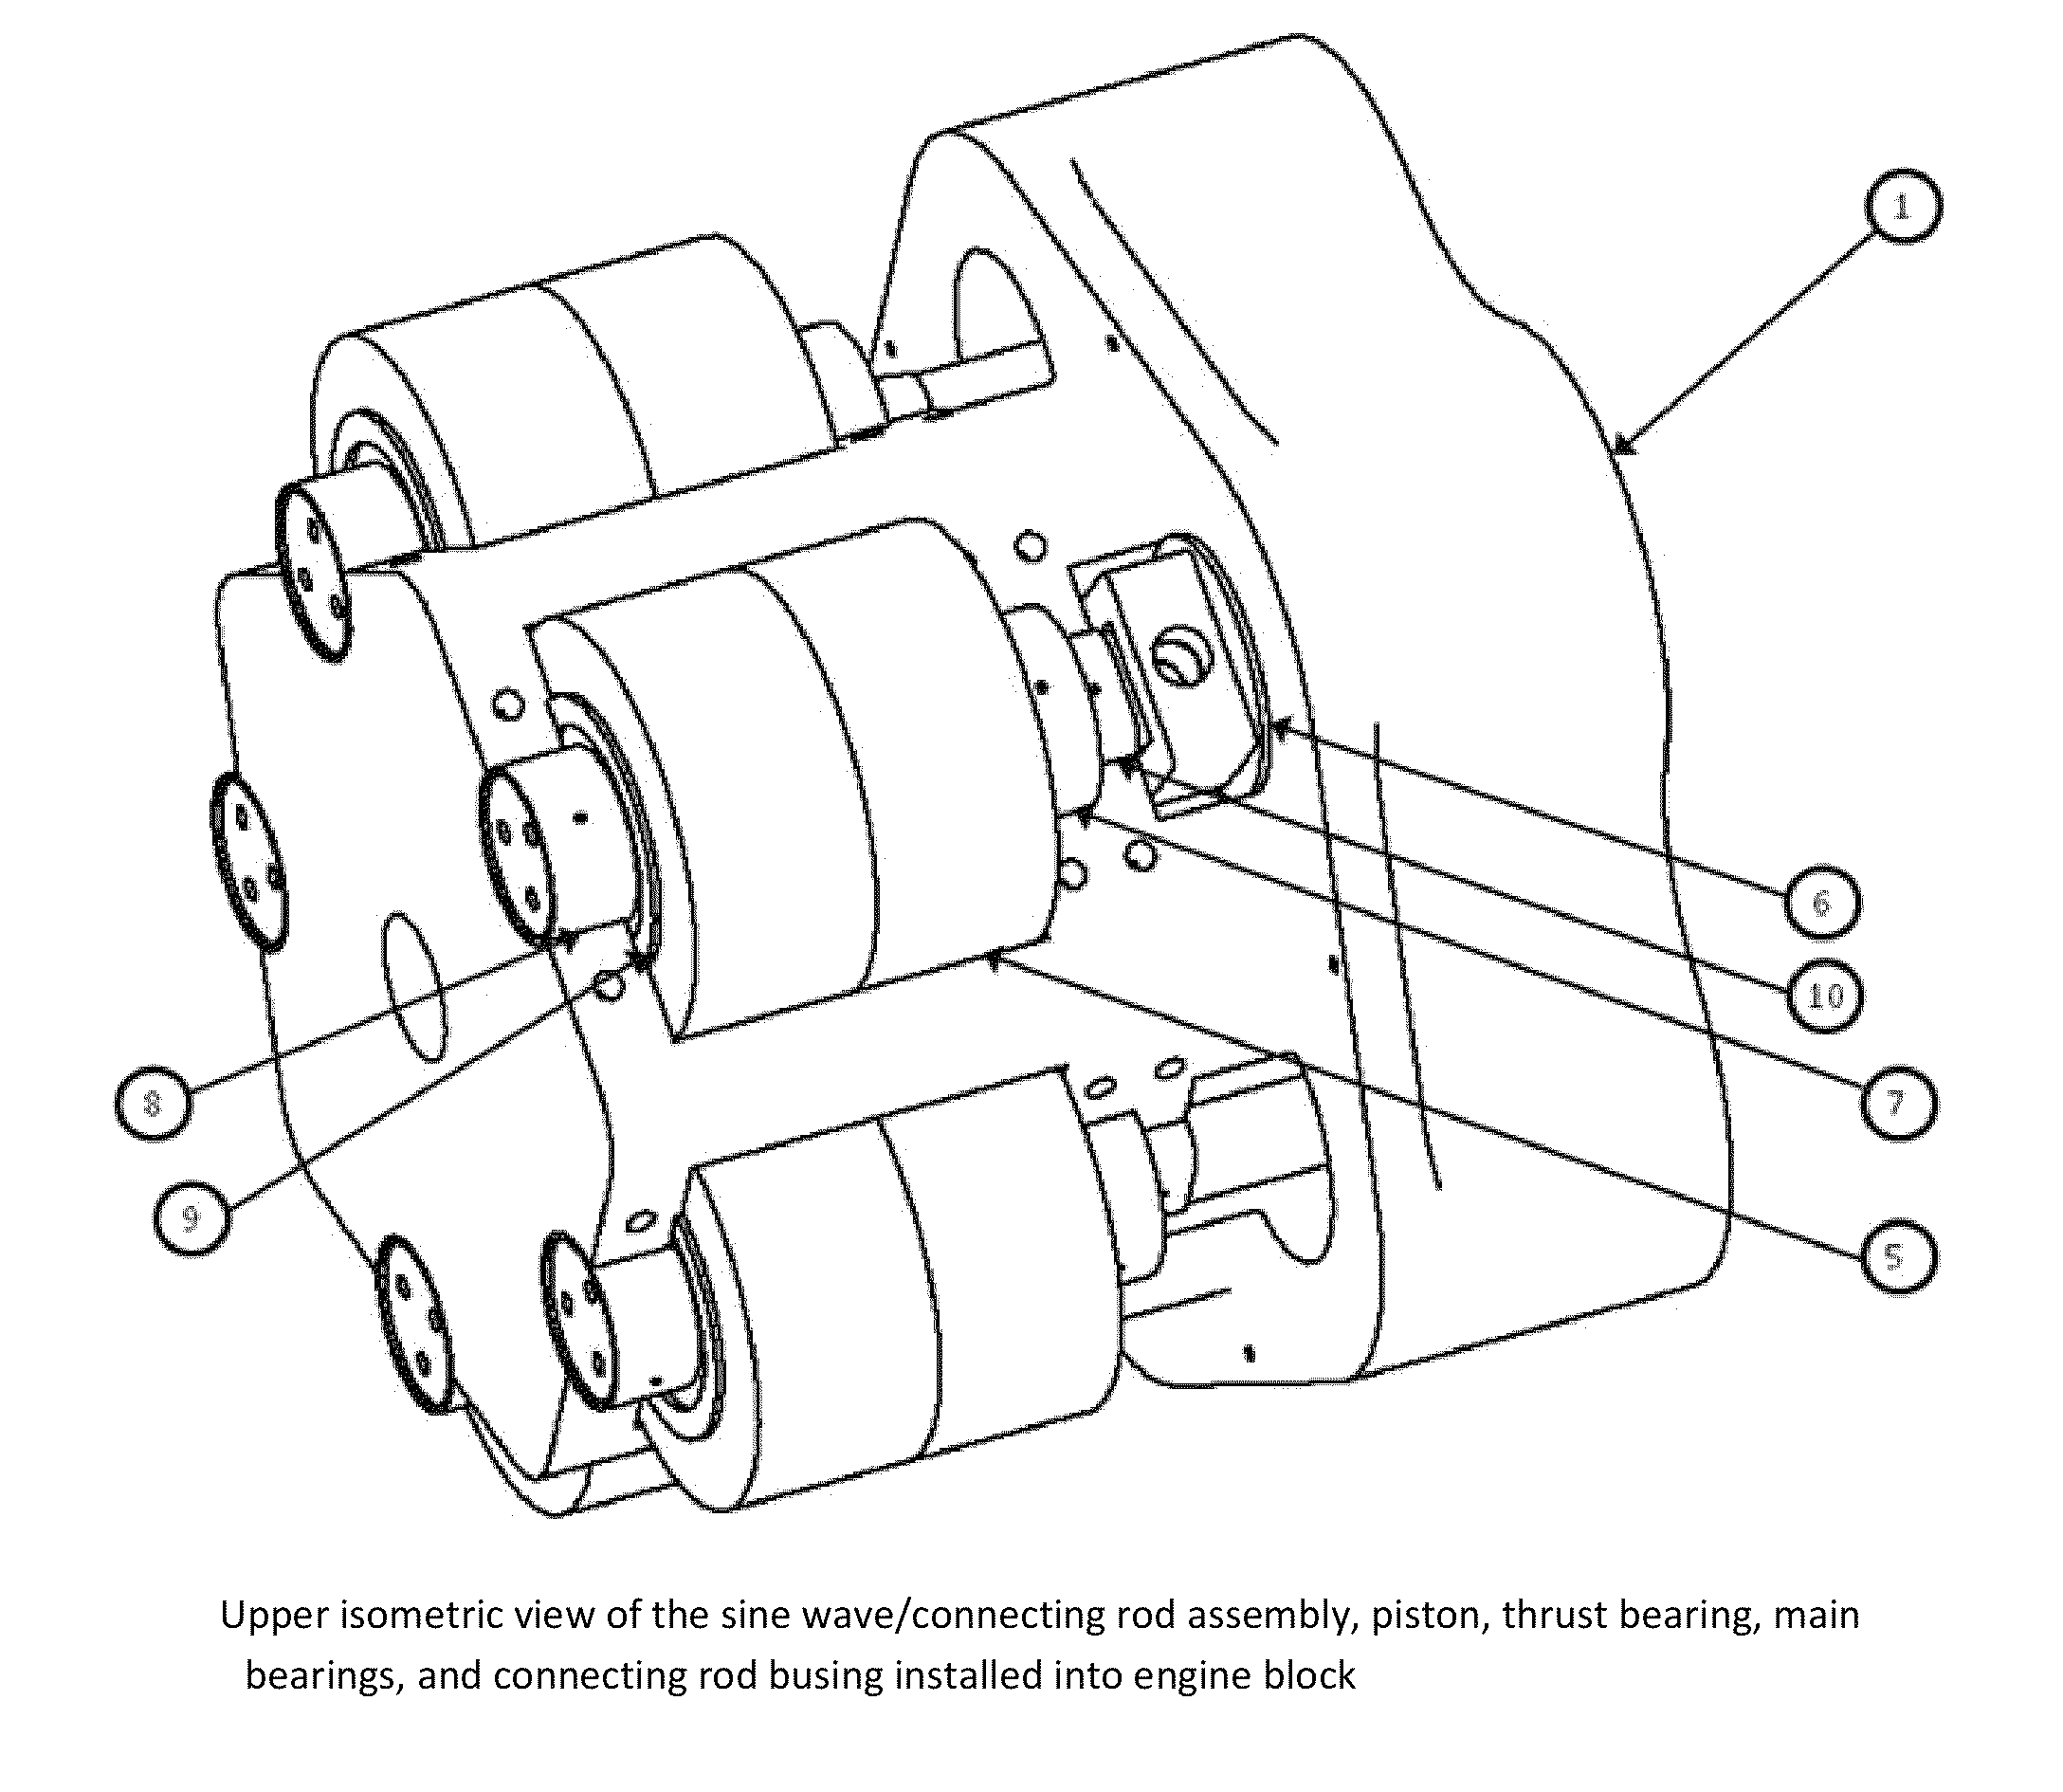 Axial piston internal combustion engine using an Atkinson cycle